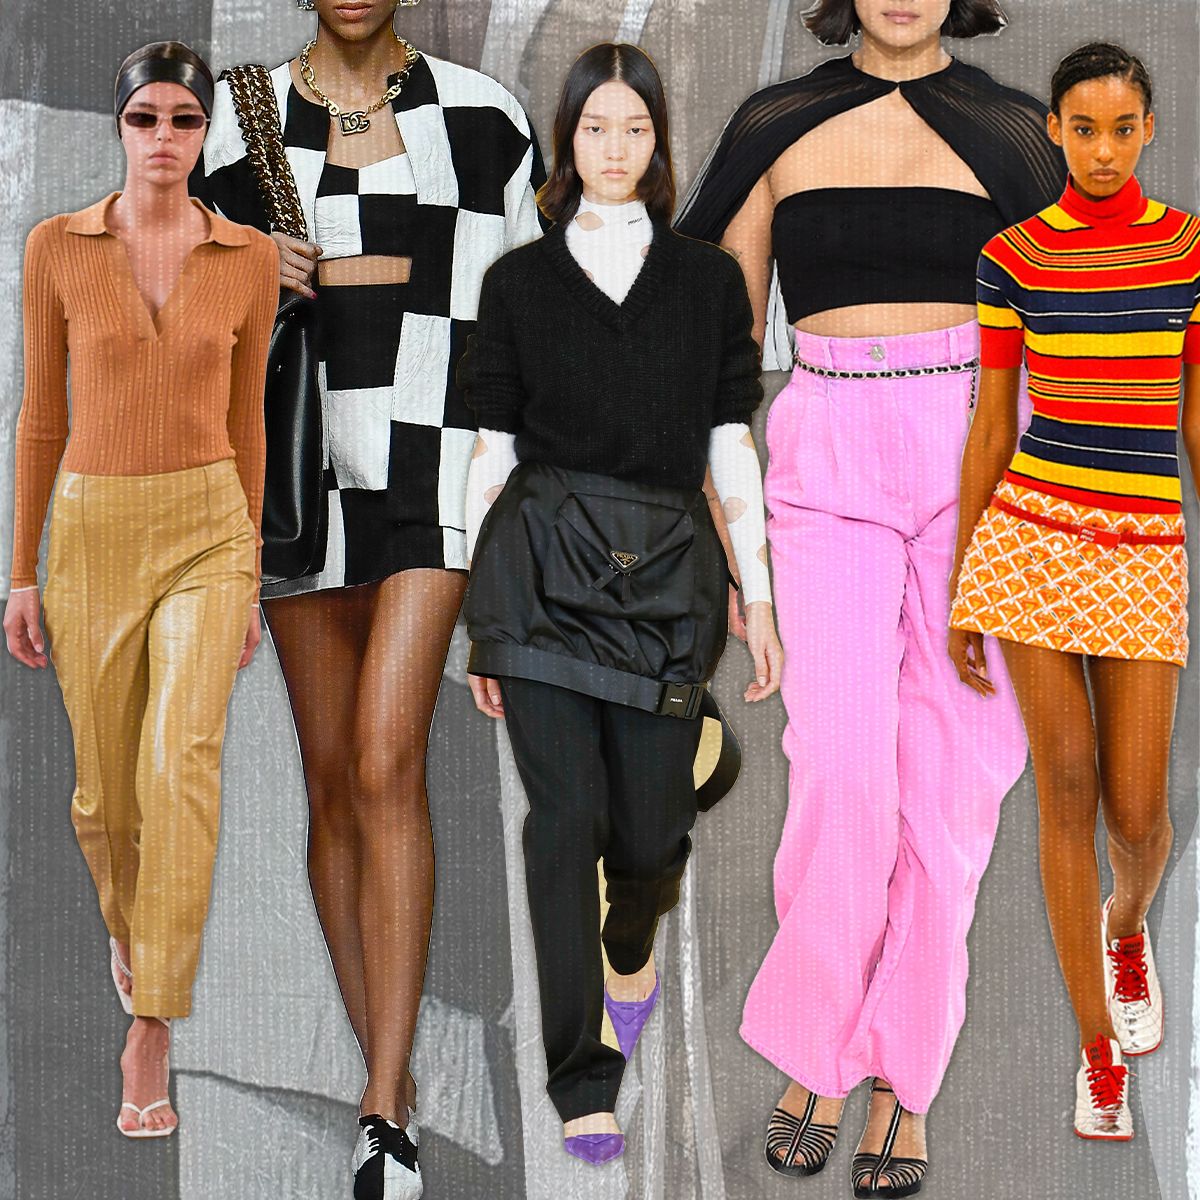 Fashion Trend Forecast 2021: Here's What's in and What's Out